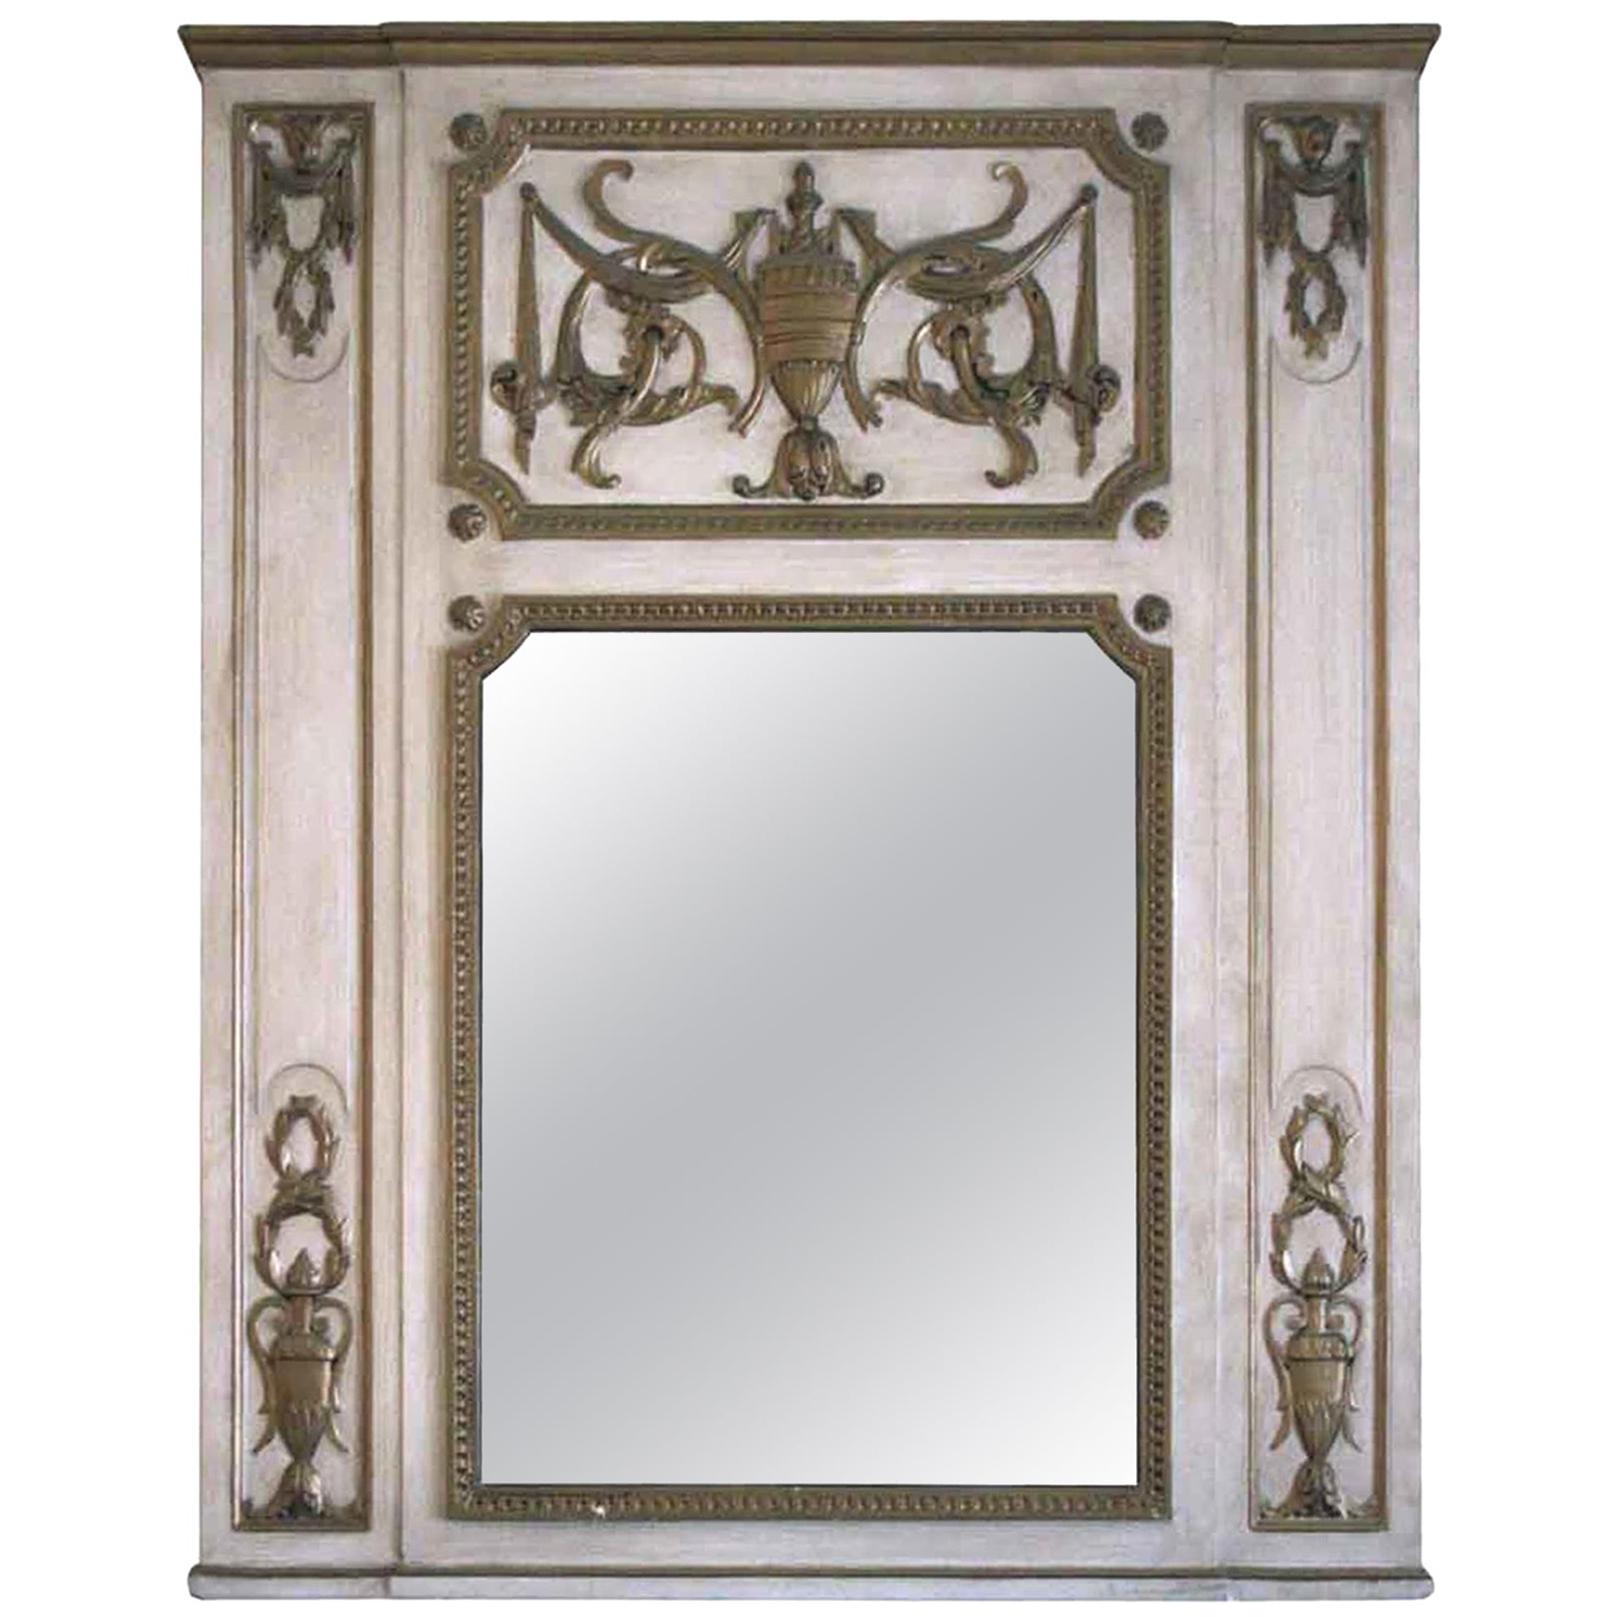 1931 NY Waldorf Astoria Hotel Urn Motif Carved Over Mantel Mirror from Room 1064